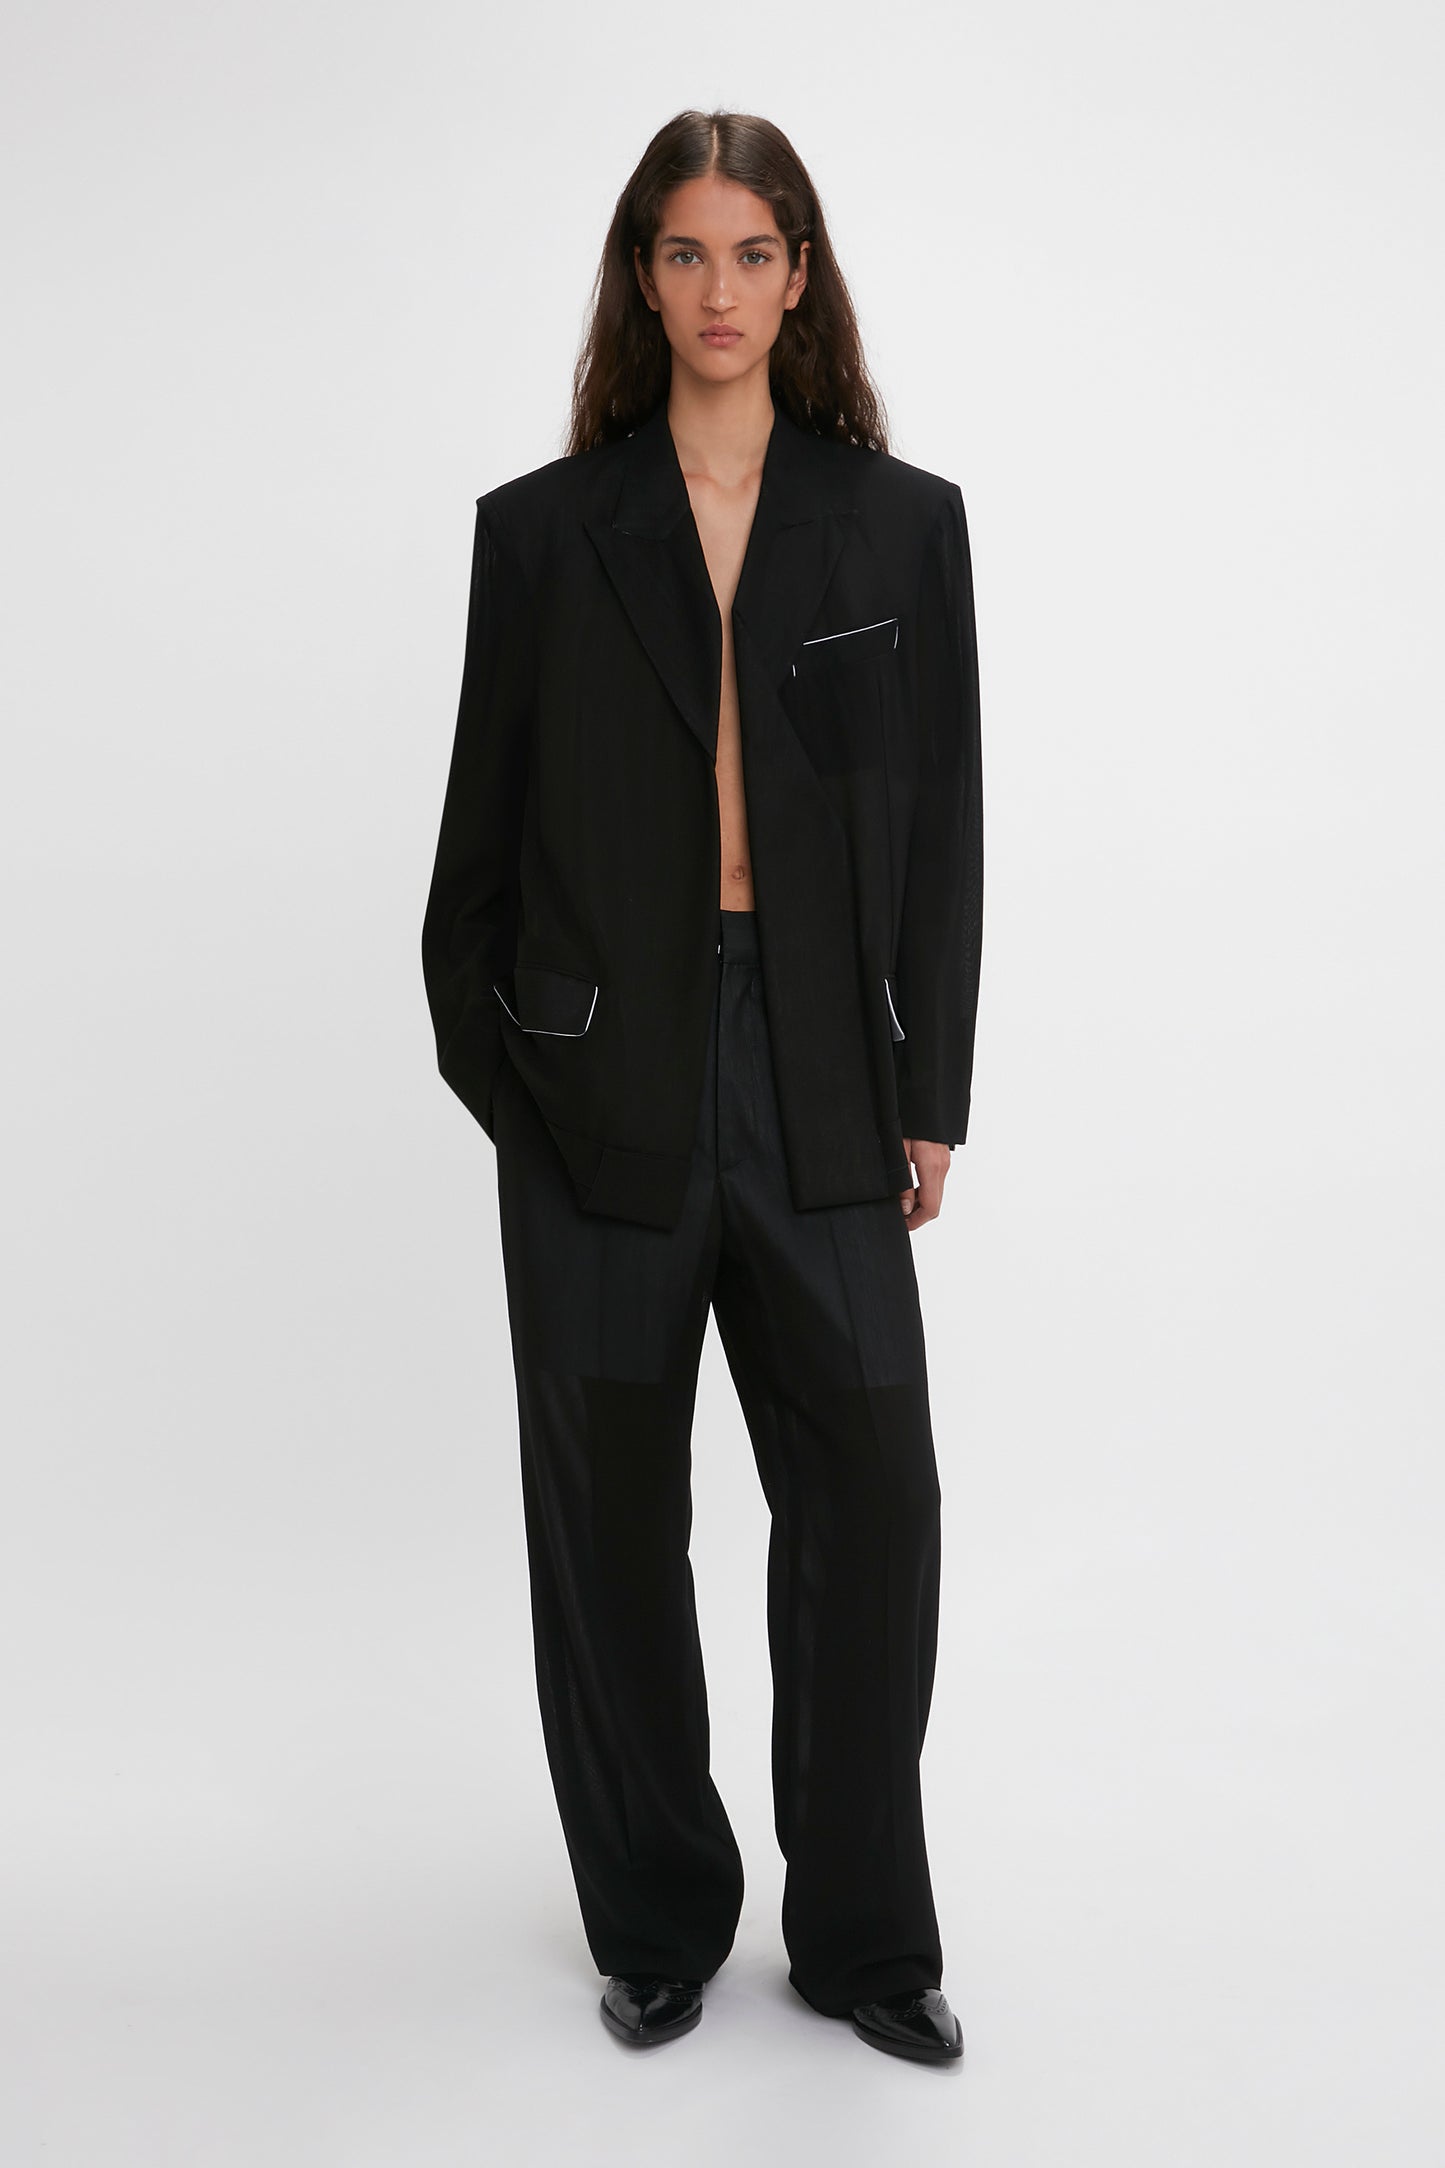 A woman in a sleek black suit with a Victoria Beckham Fold Detail Tailored Jacket featuring folded detail and straight leg trousers, standing against a plain white background.